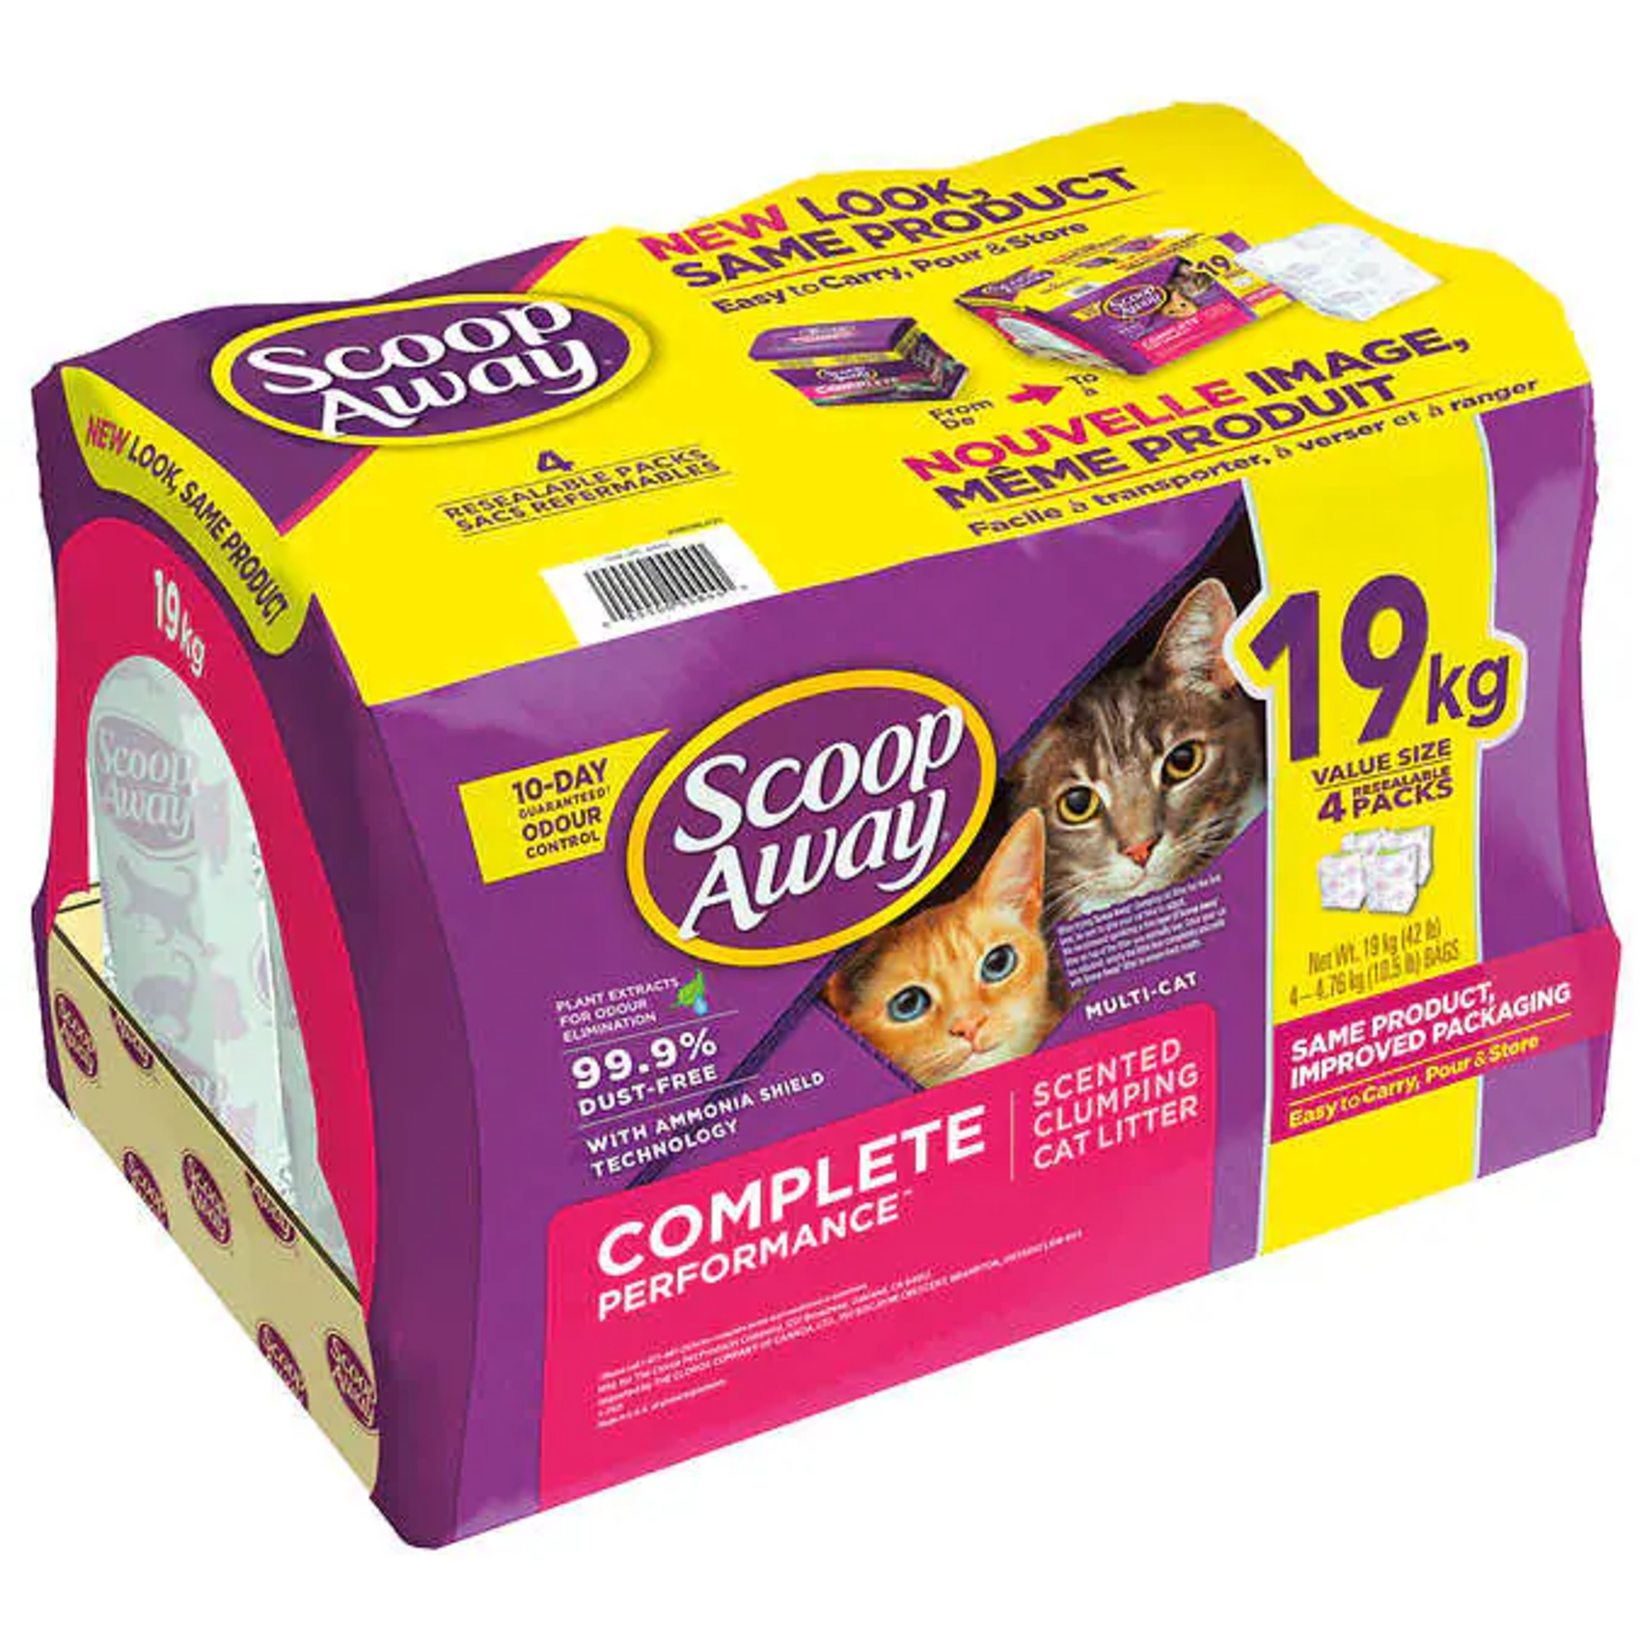 Scoop Away Complete Performance Clumping Cat Litter 19kg